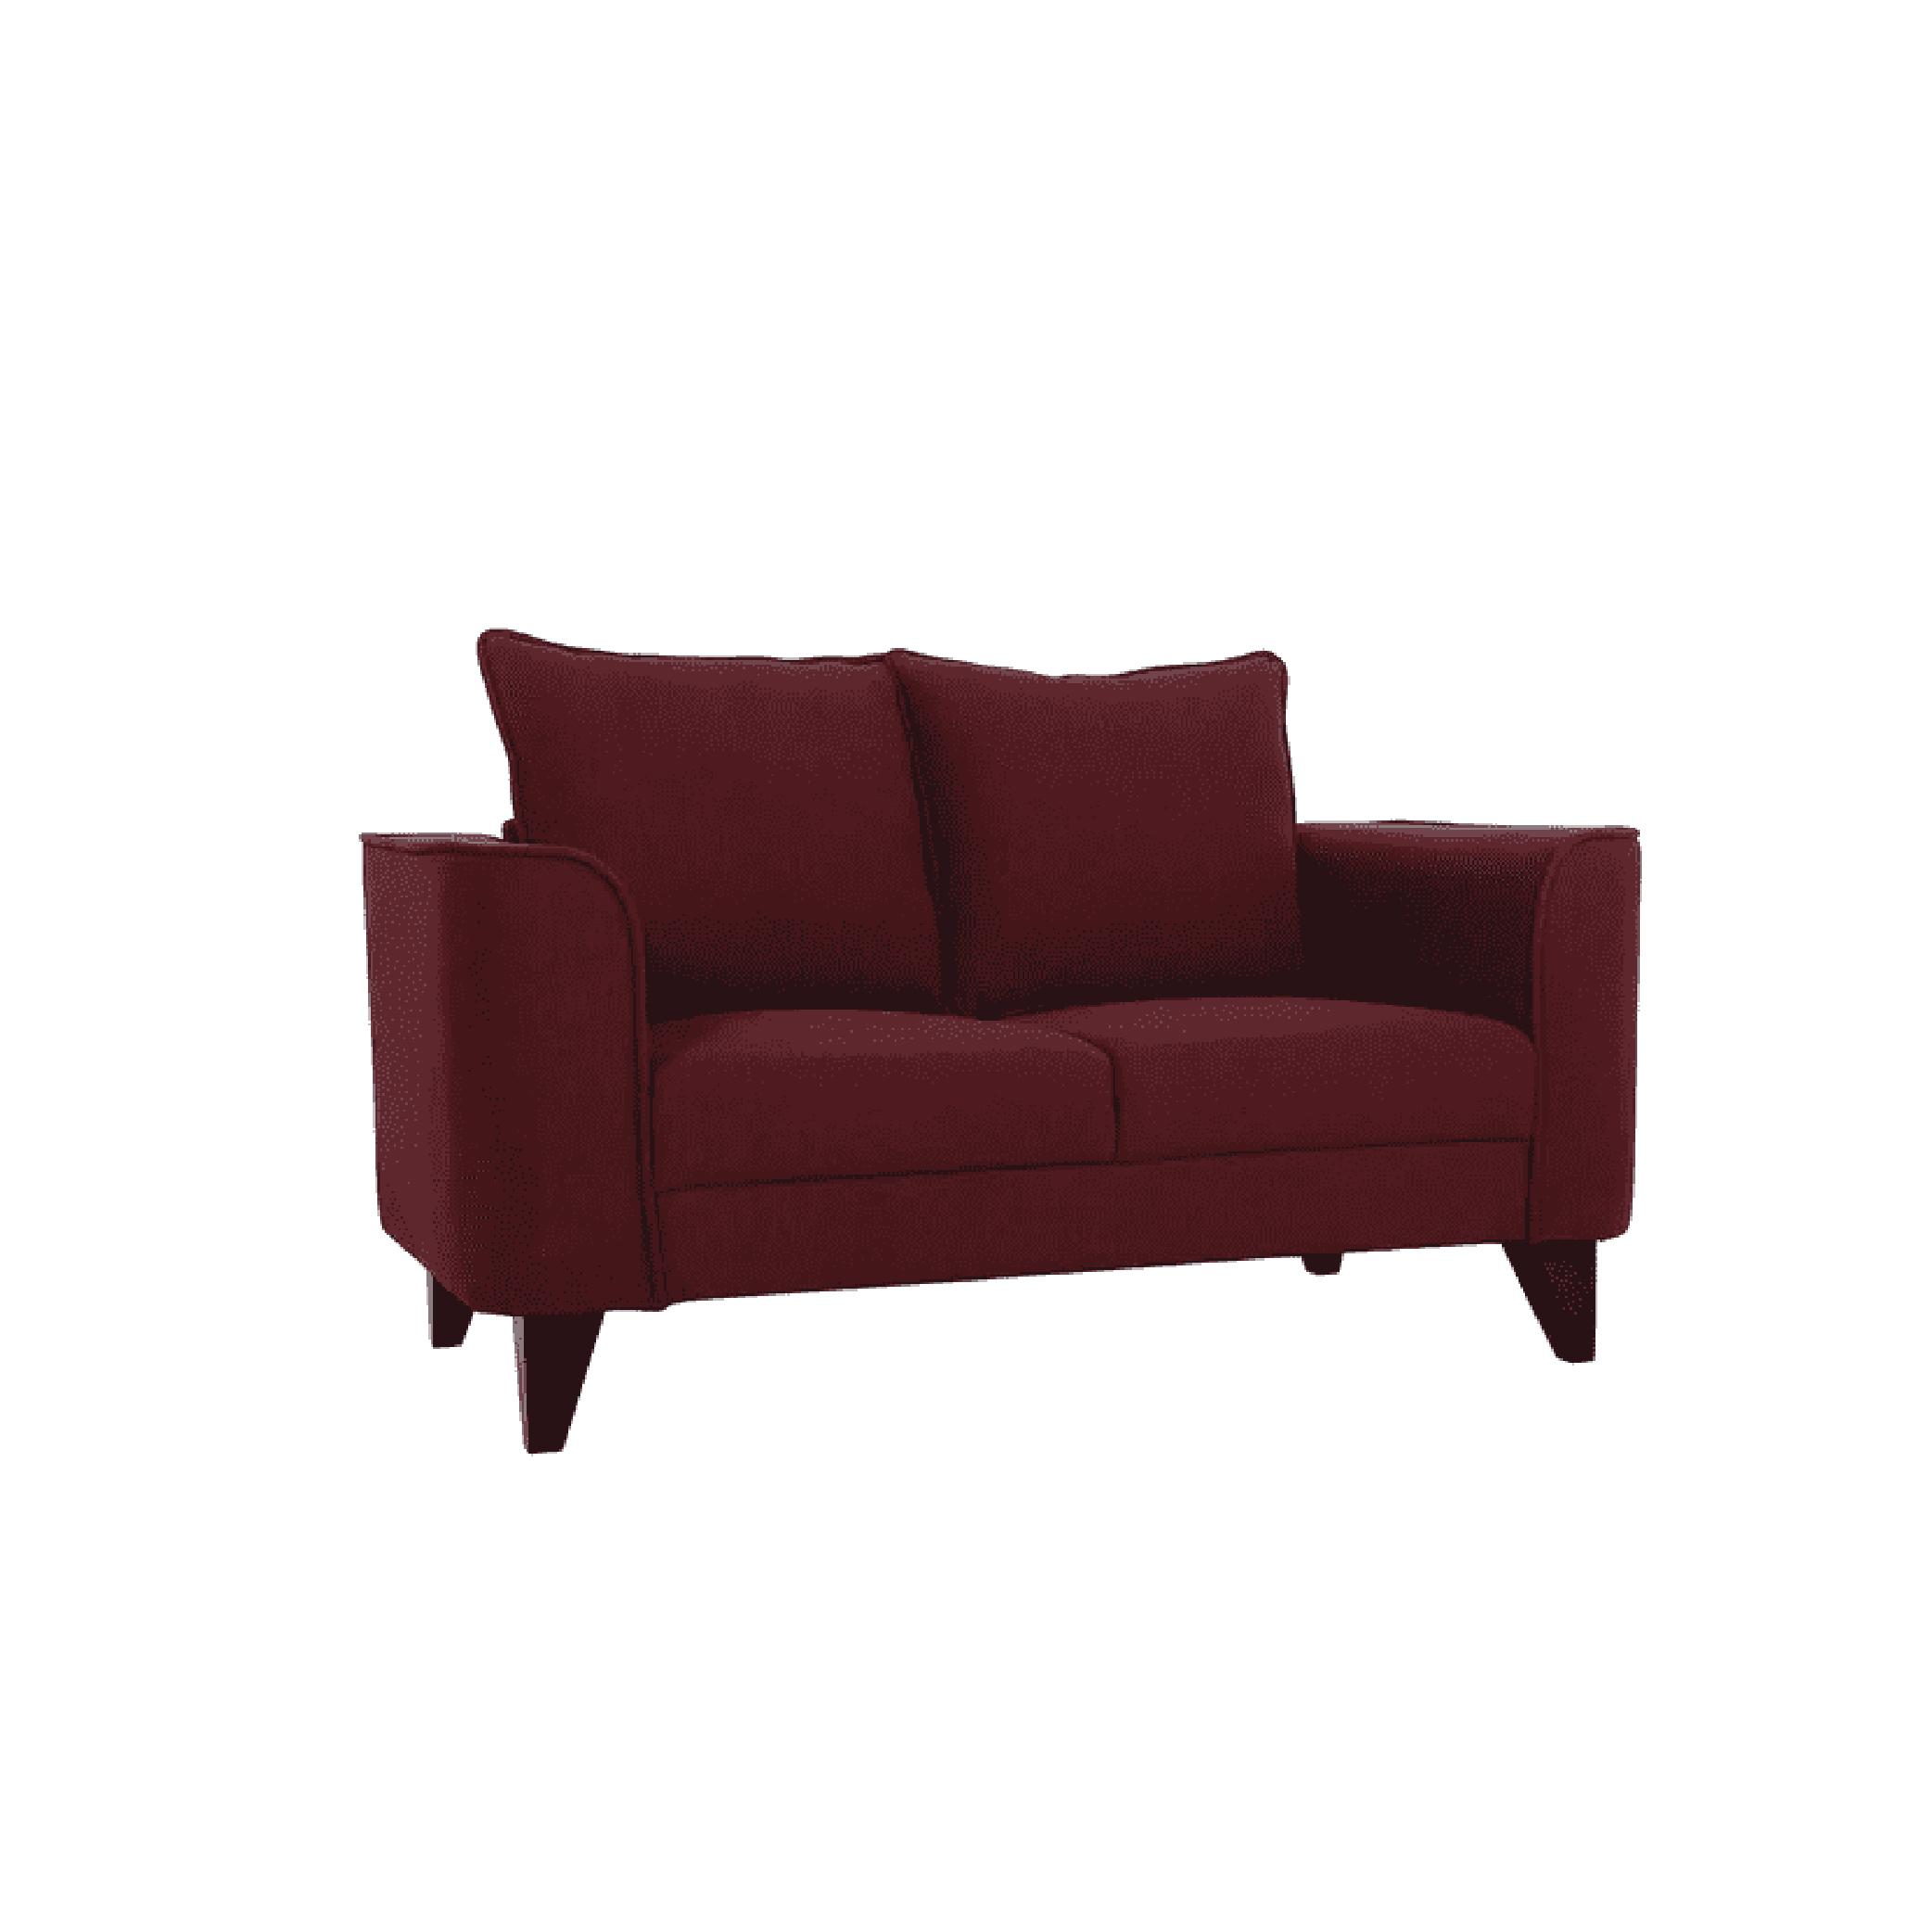 Sessa Two Seater Sofa in Garnet Red Colour